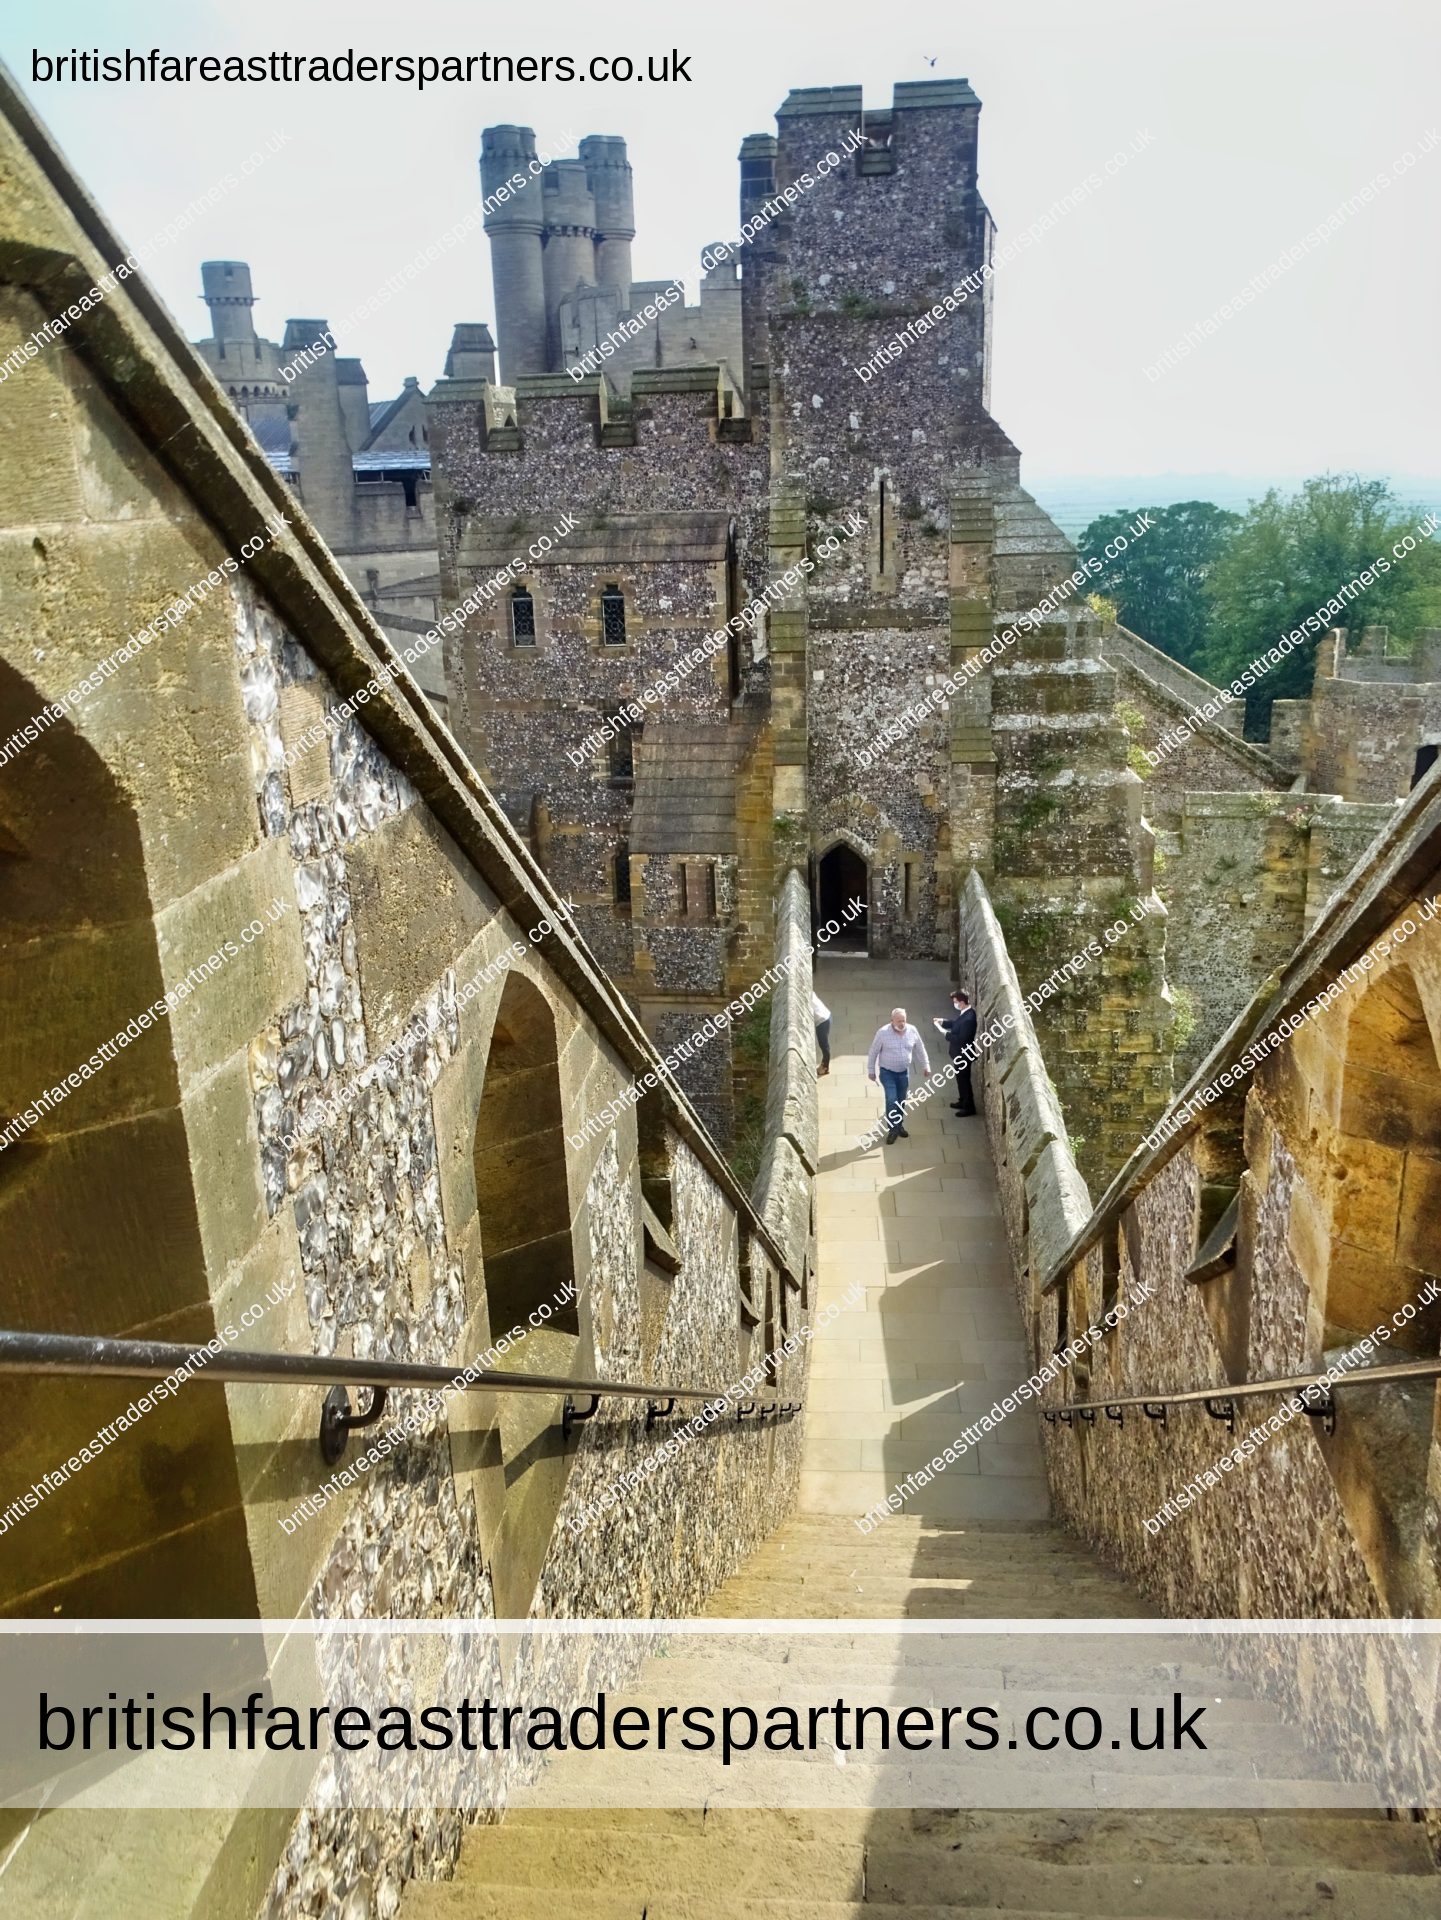 DAYS OUT IN UNITED KINGDOM: PLACES OF INTEREST in WEST SUSSEX, ENGLAND: A SERIES OF PHOTOGRAPHIC BLOG: ARUNDEL CASTLE KEEP : A WORLD HERITAGE SITE : HERITAGE | ART | HISTORY | TOPOGRAPHY | TOURISM | TRAVEL | ARCHITECTURE | ARISTOCRACY | CULTURE